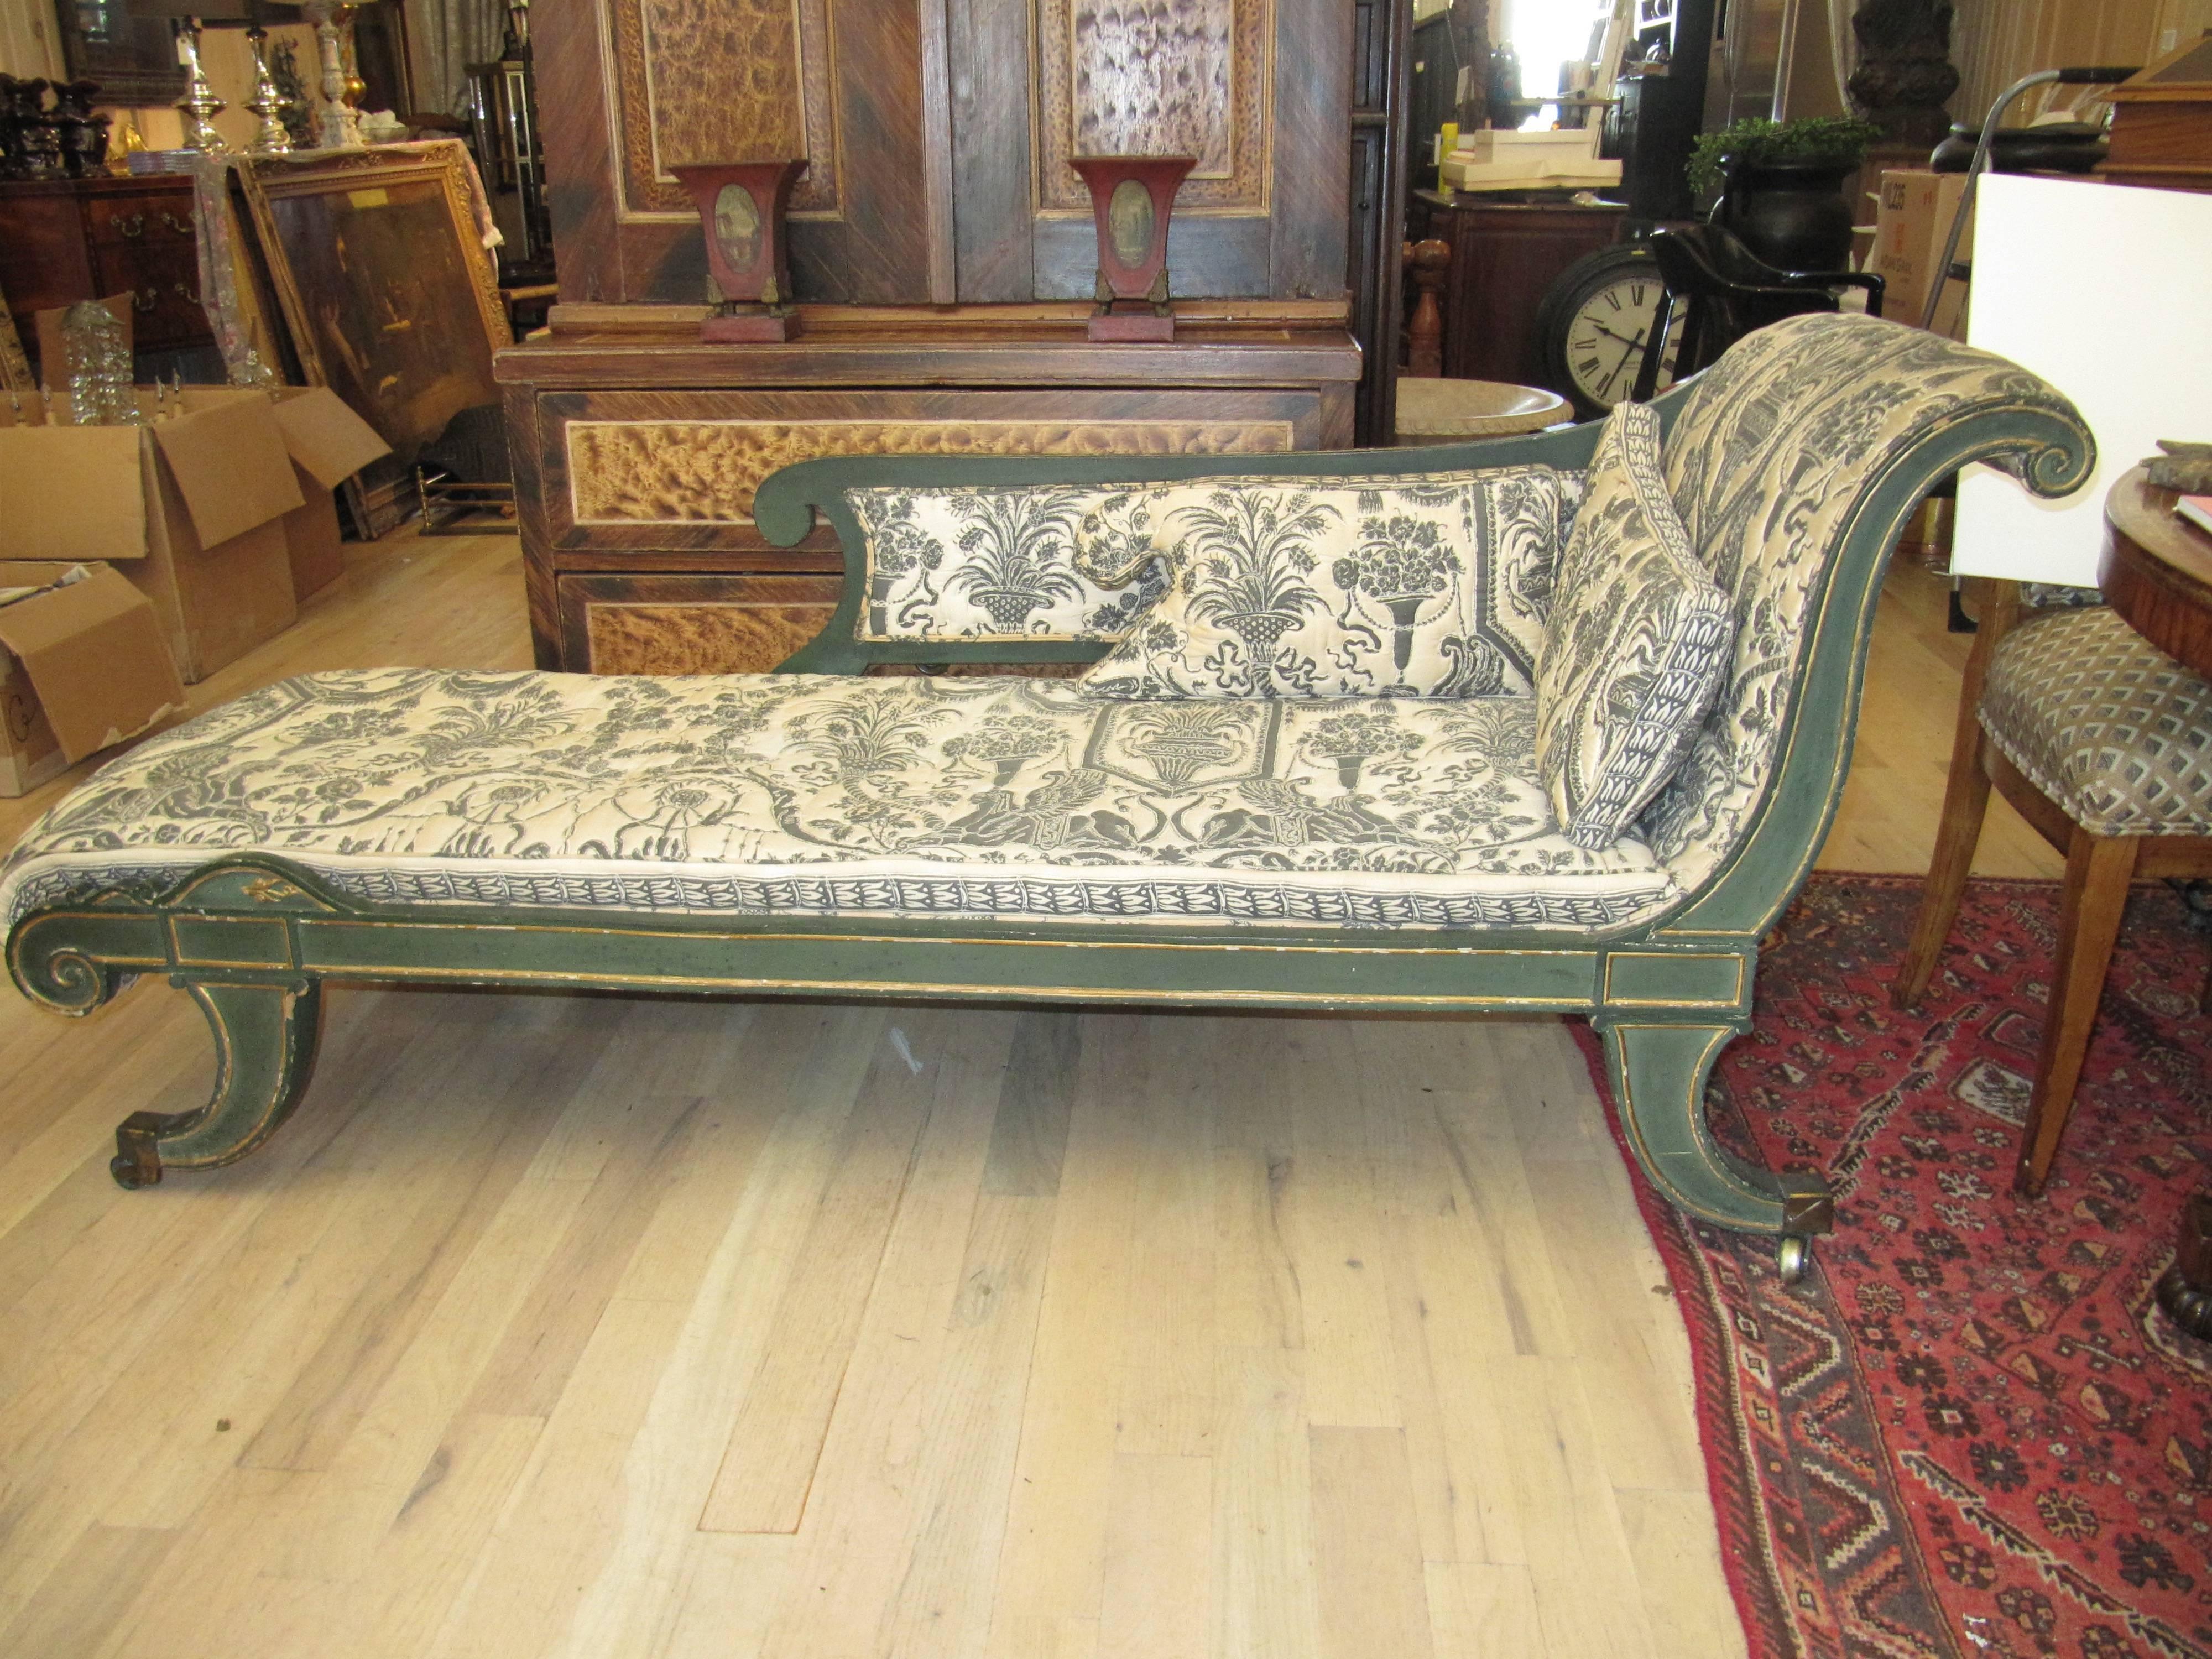 Charming early 19th century Regency chaise longues with painted decoration.